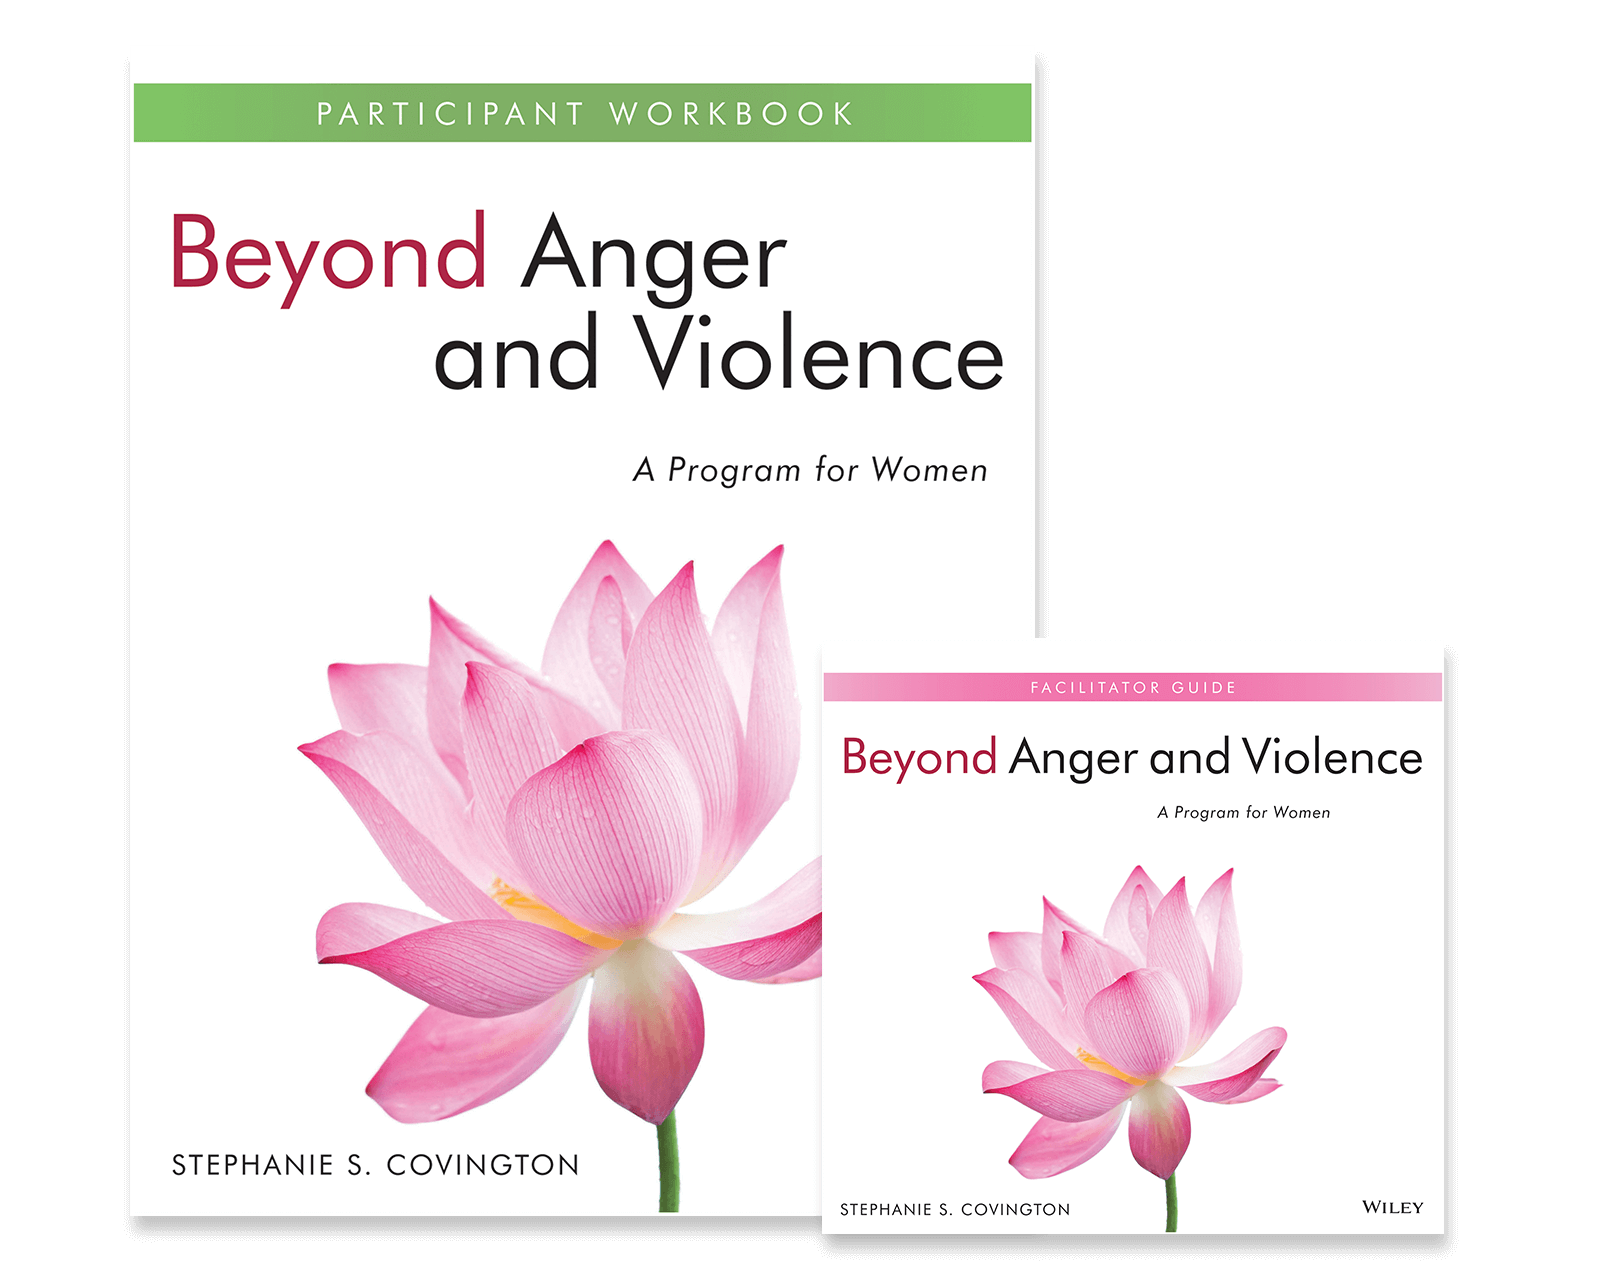 Beyond Anger and Violence: A Program for Women